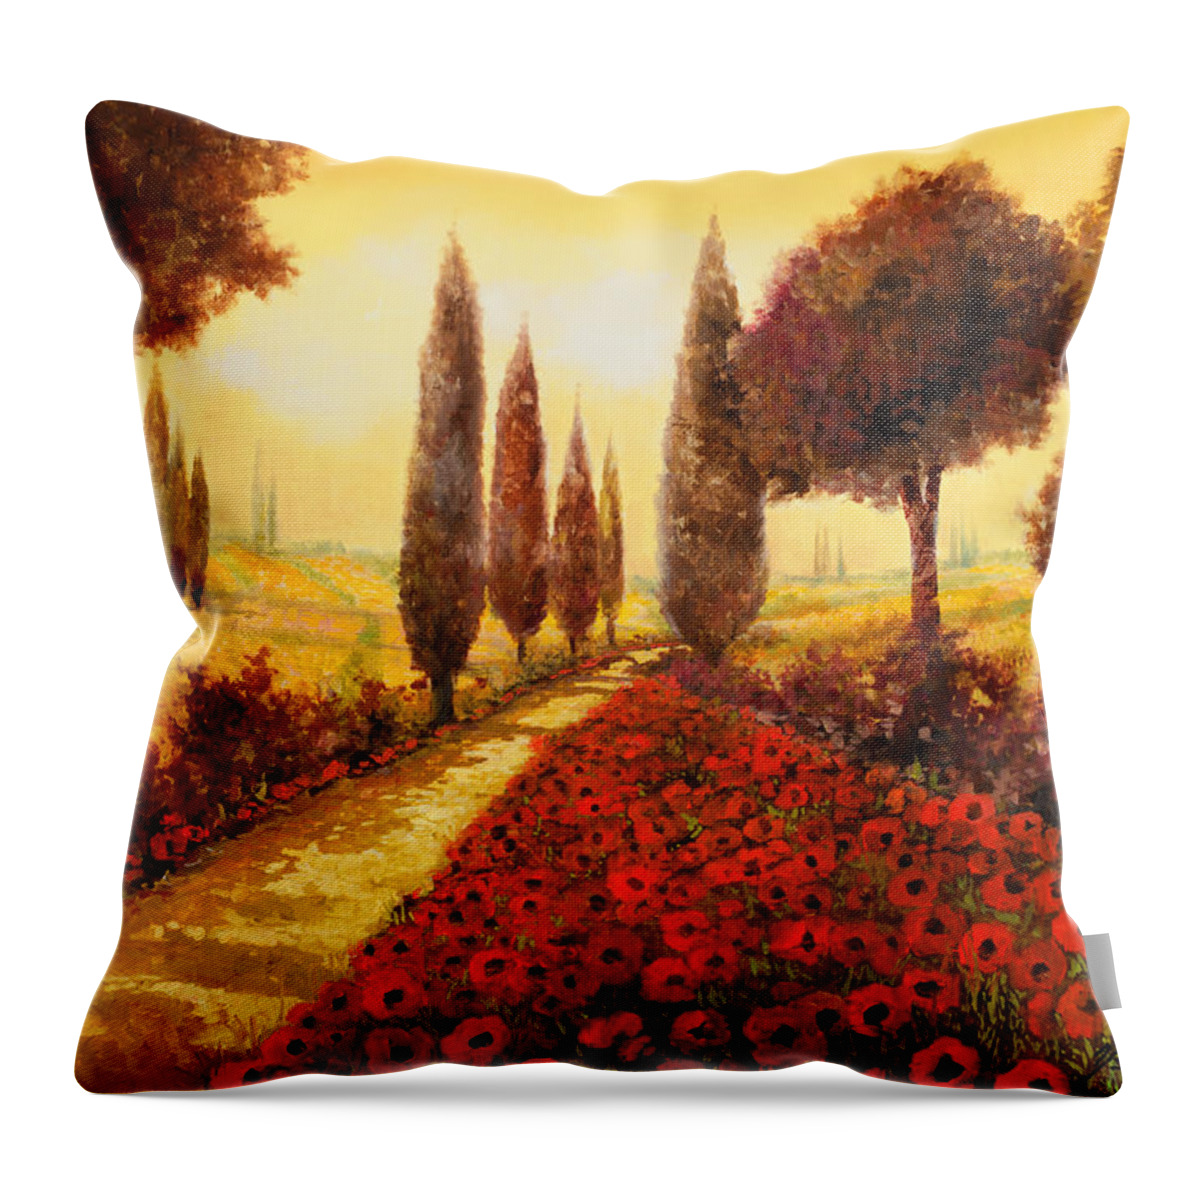 Poppy Fields Throw Pillow featuring the painting I Papaveri In Estate by Guido Borelli